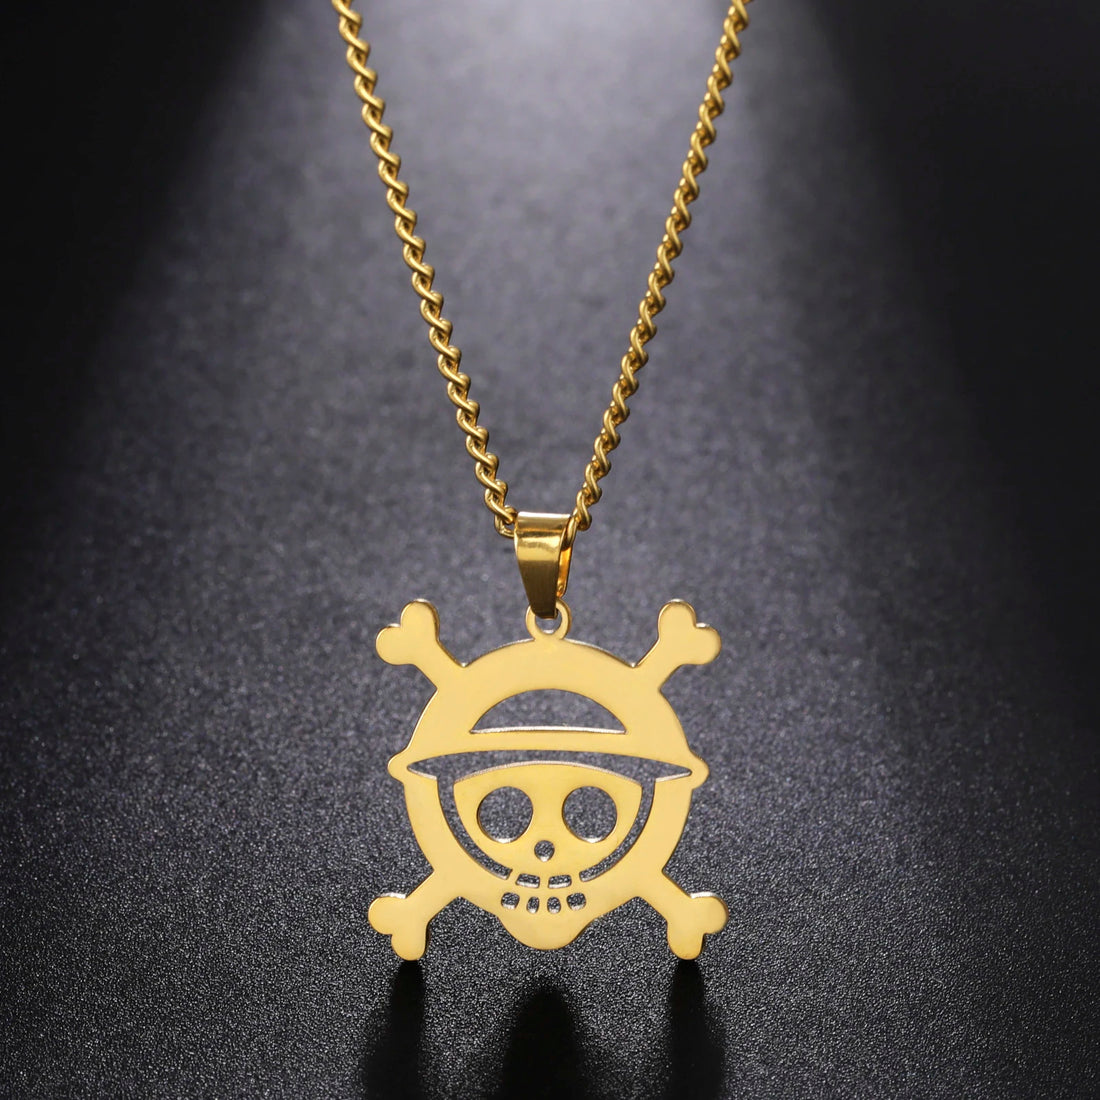 Stainless Steel Necklaces Anime Cartoon Skeleton Face Chain Fashion Choker Goth Necklace For Men Fans Jewelry Gifts One Piece